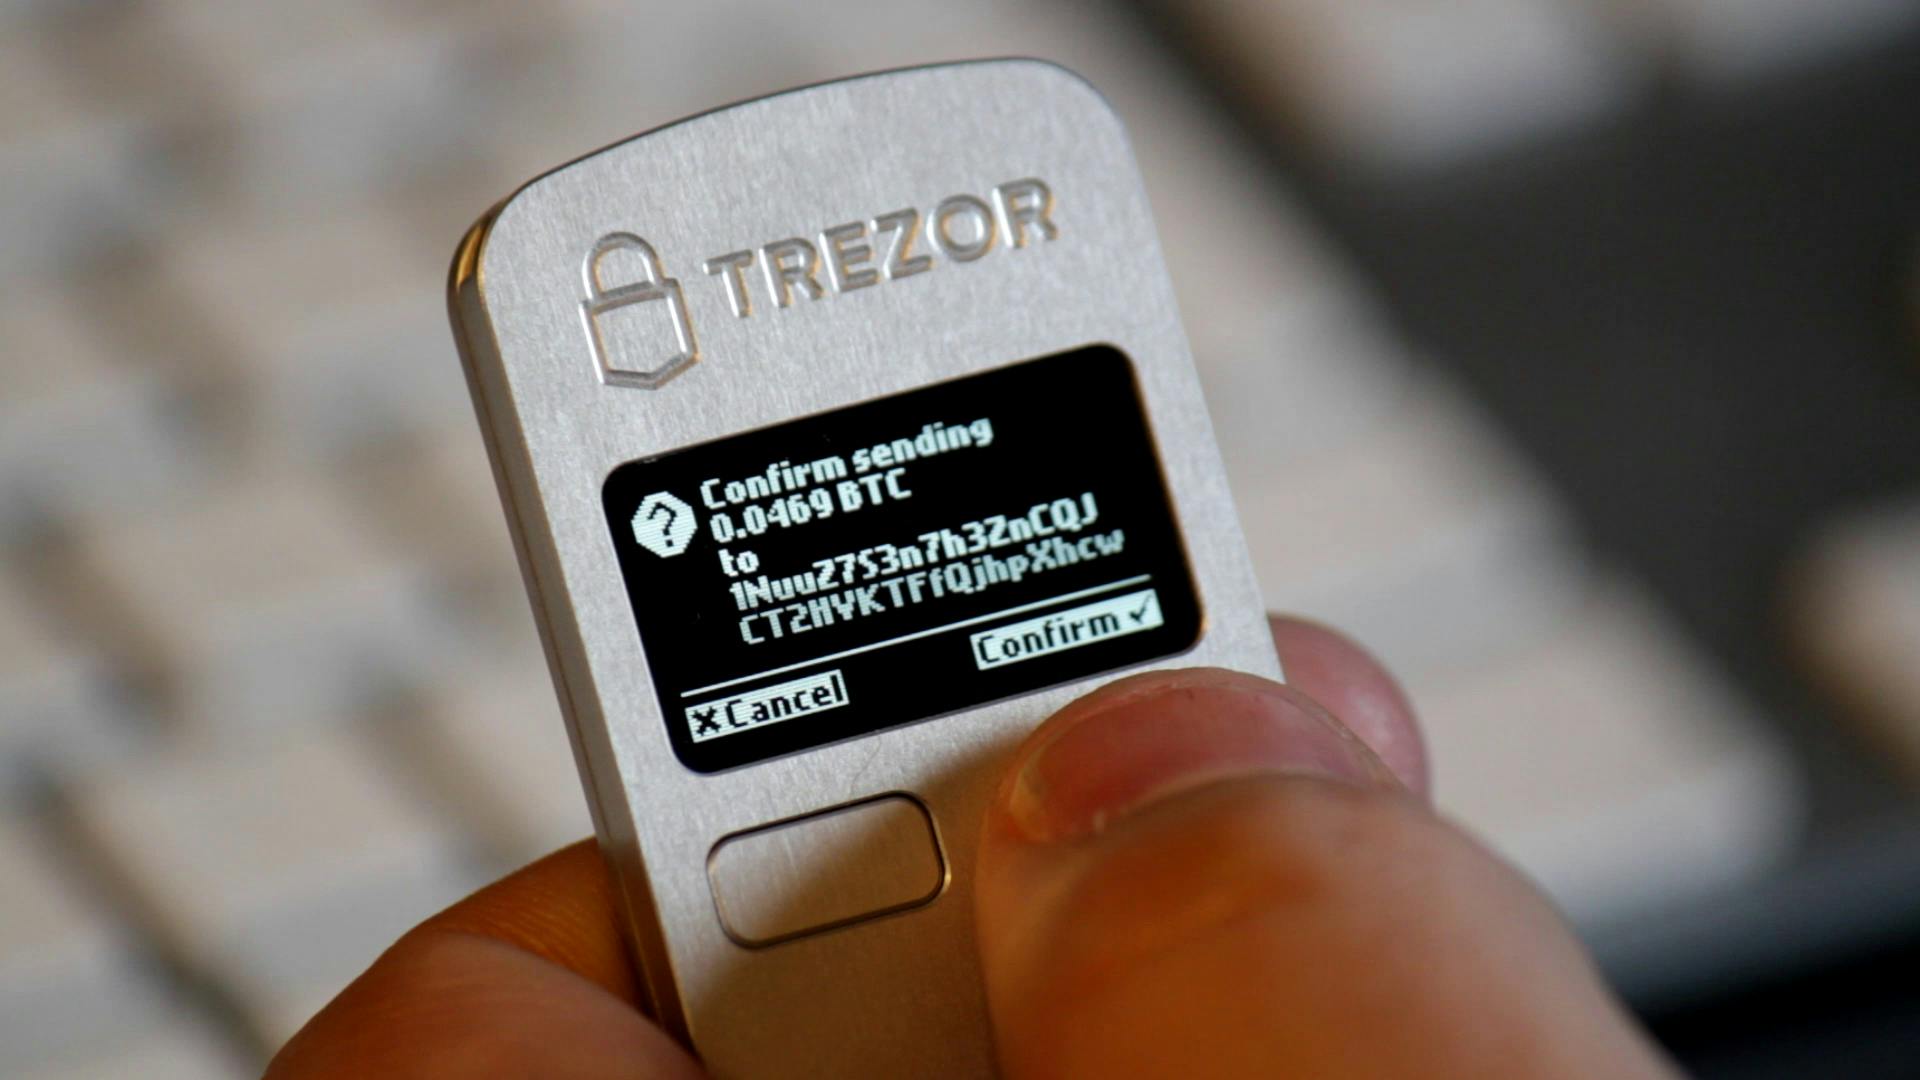 Trezor on X: With a hardware wallet ✓ You own 100% of your coins